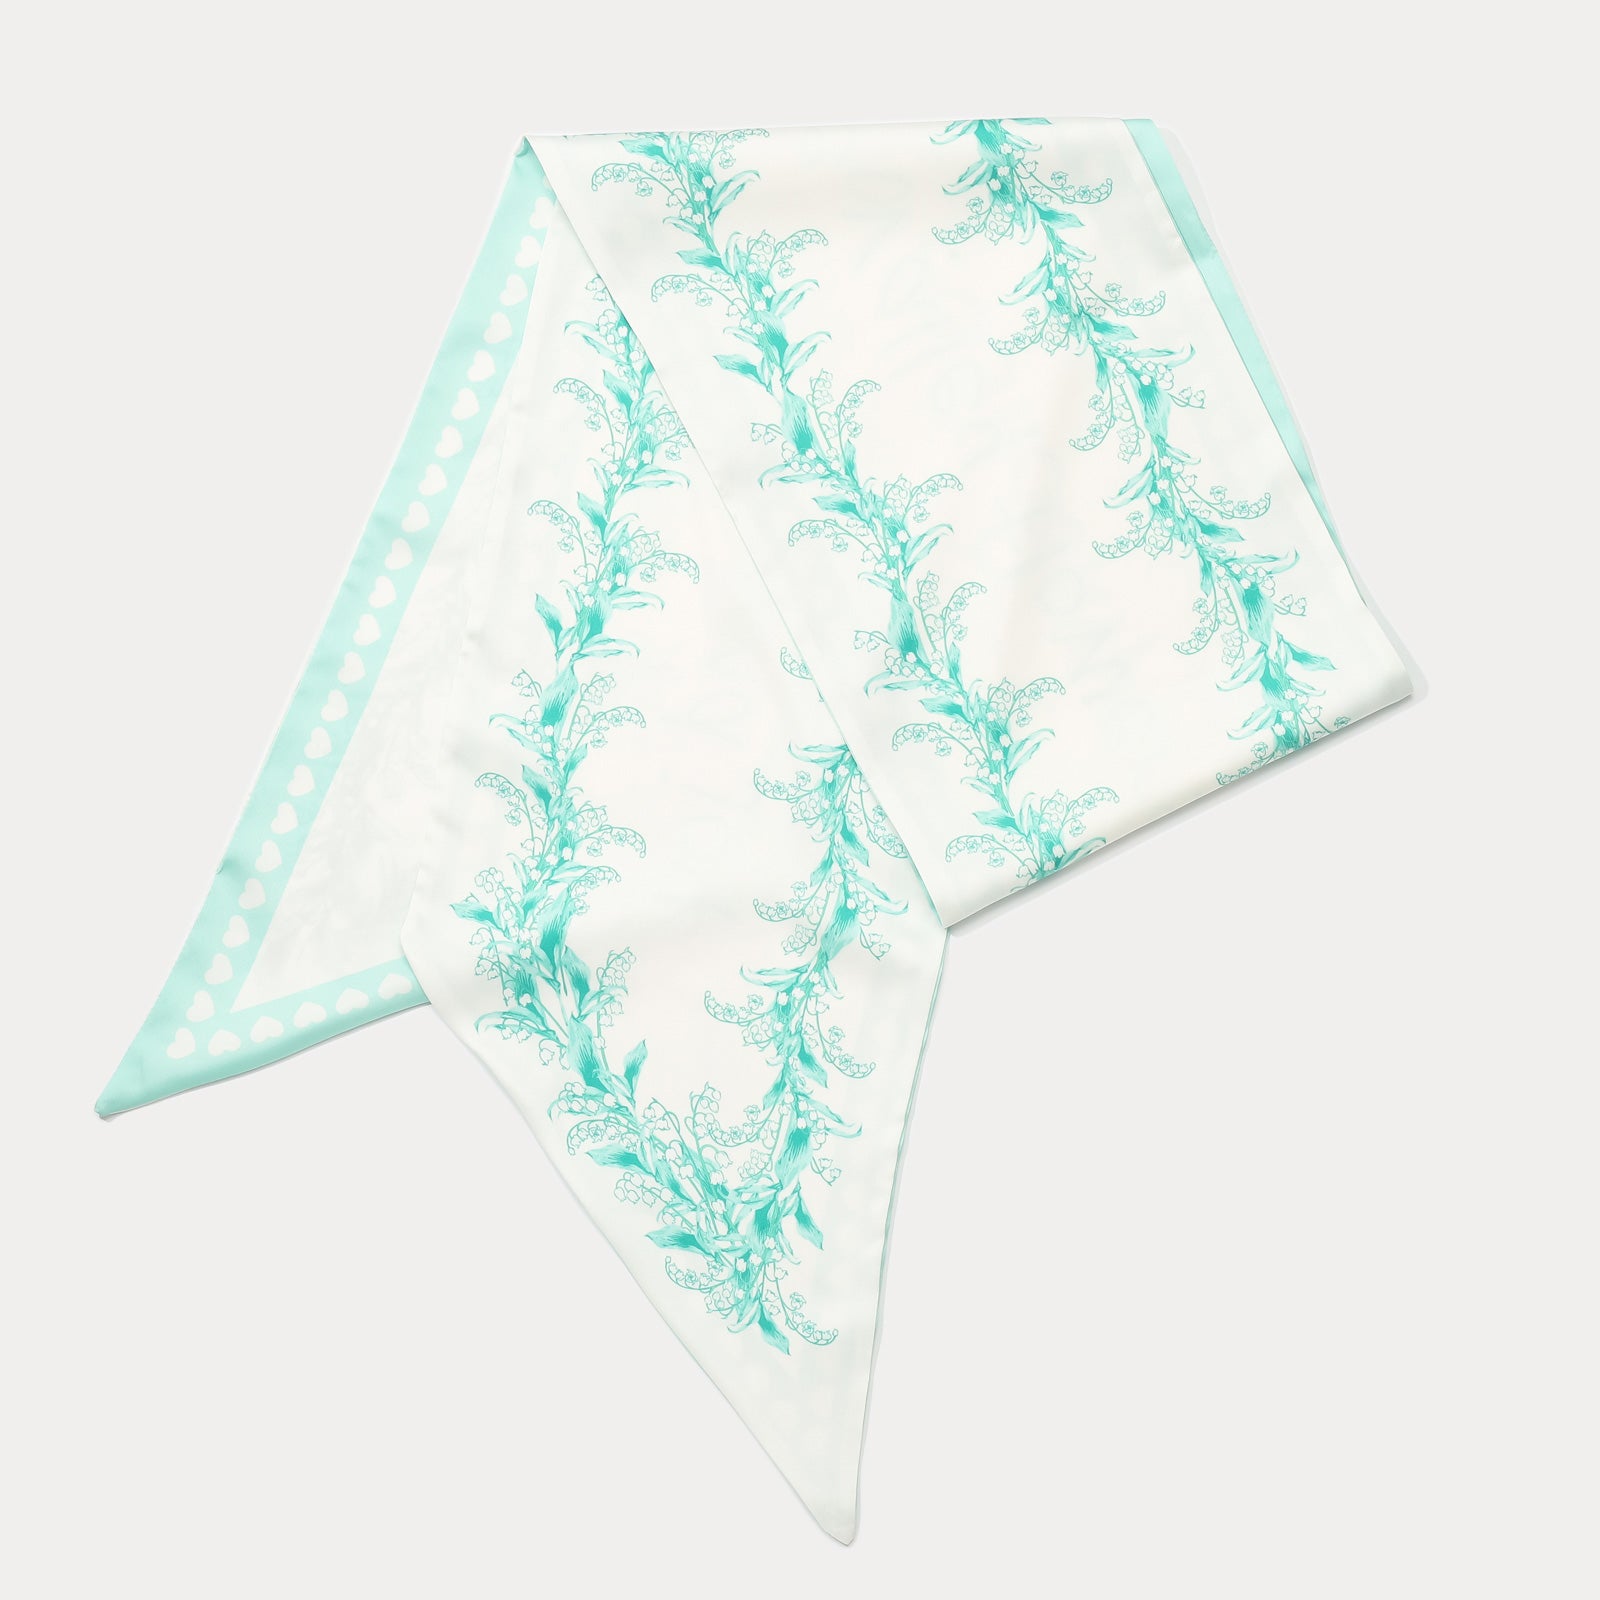 Lily Of The Valley Handbag Scarf